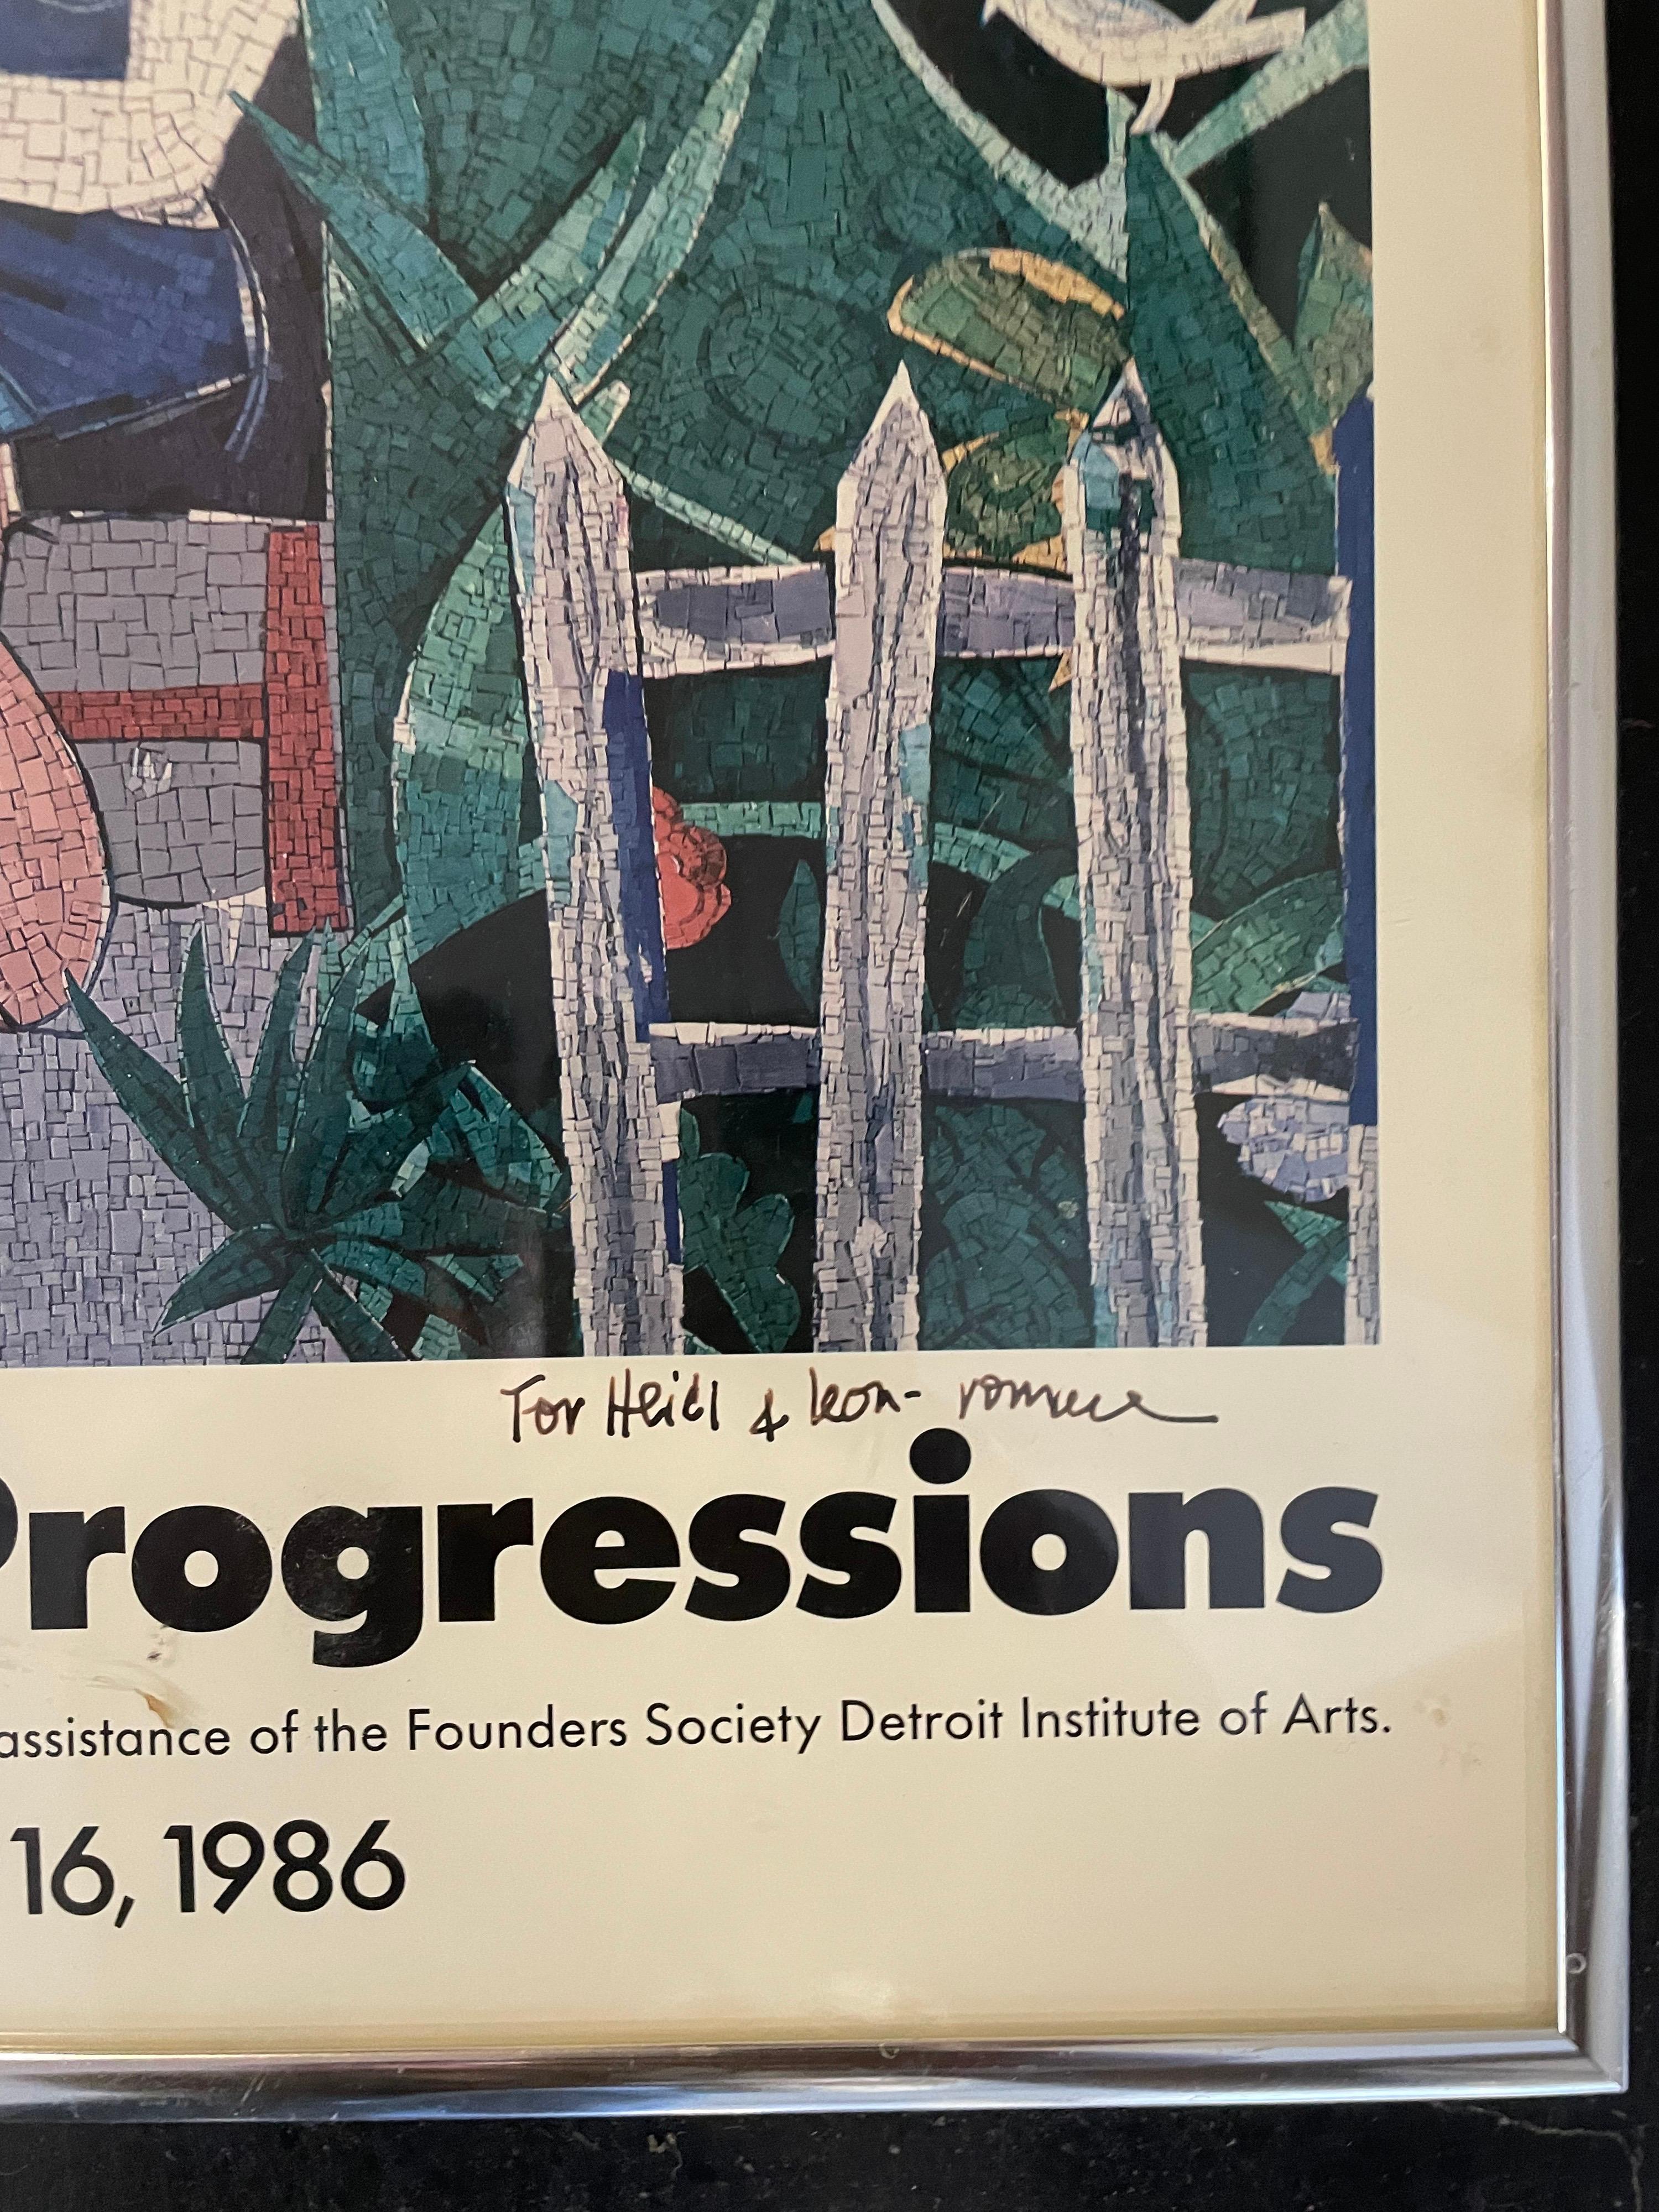 Rare signed Romare Bearden Lithograph. Romare Bearden’s vibrant paintings, drawings, collages, and photomontages canonized Black experience in mid-20th-century America.